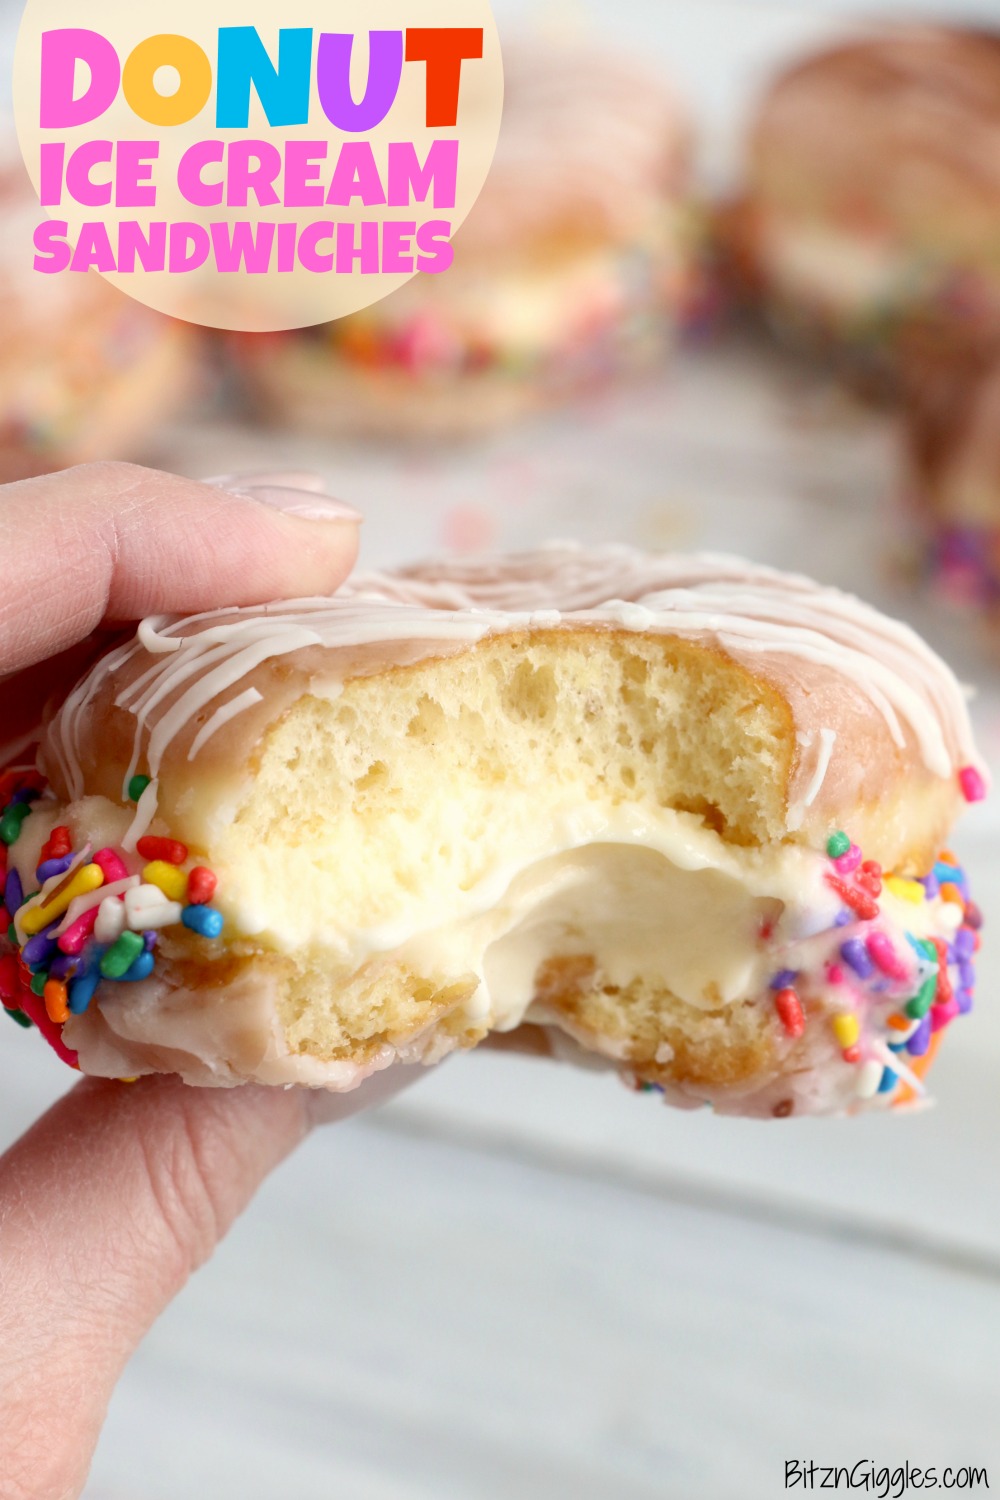 holding a donut ice cream sandwich with a bite out of it